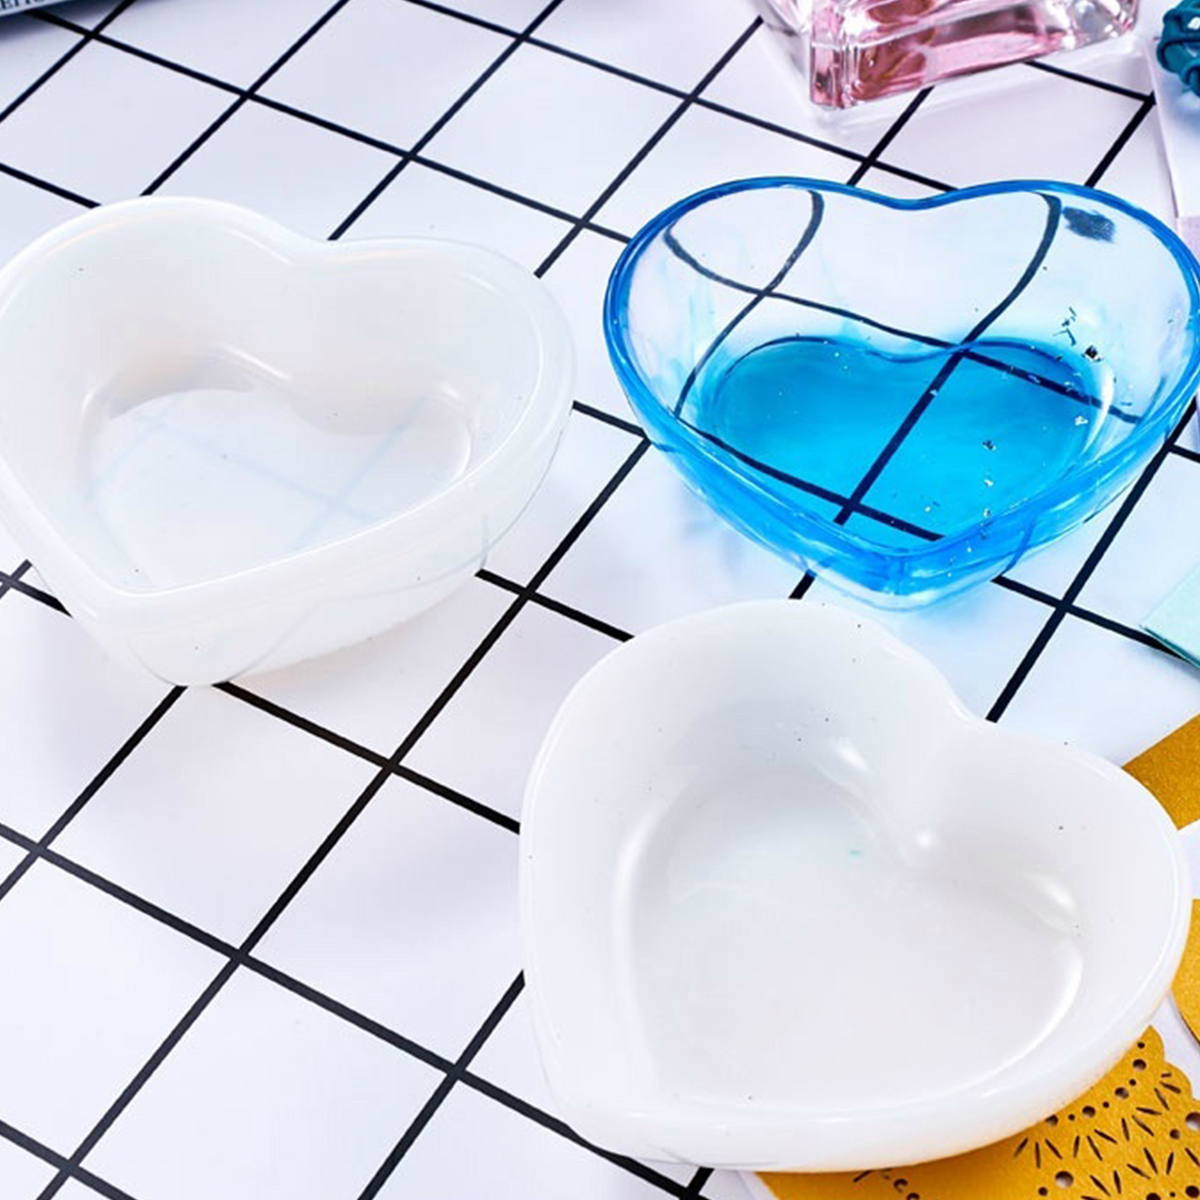 DIY-Resin-Casting-Molds-Heart-Square-Round-Shape-Mod-Clear-Silicone-Craft-Making-Mould-1526984-9